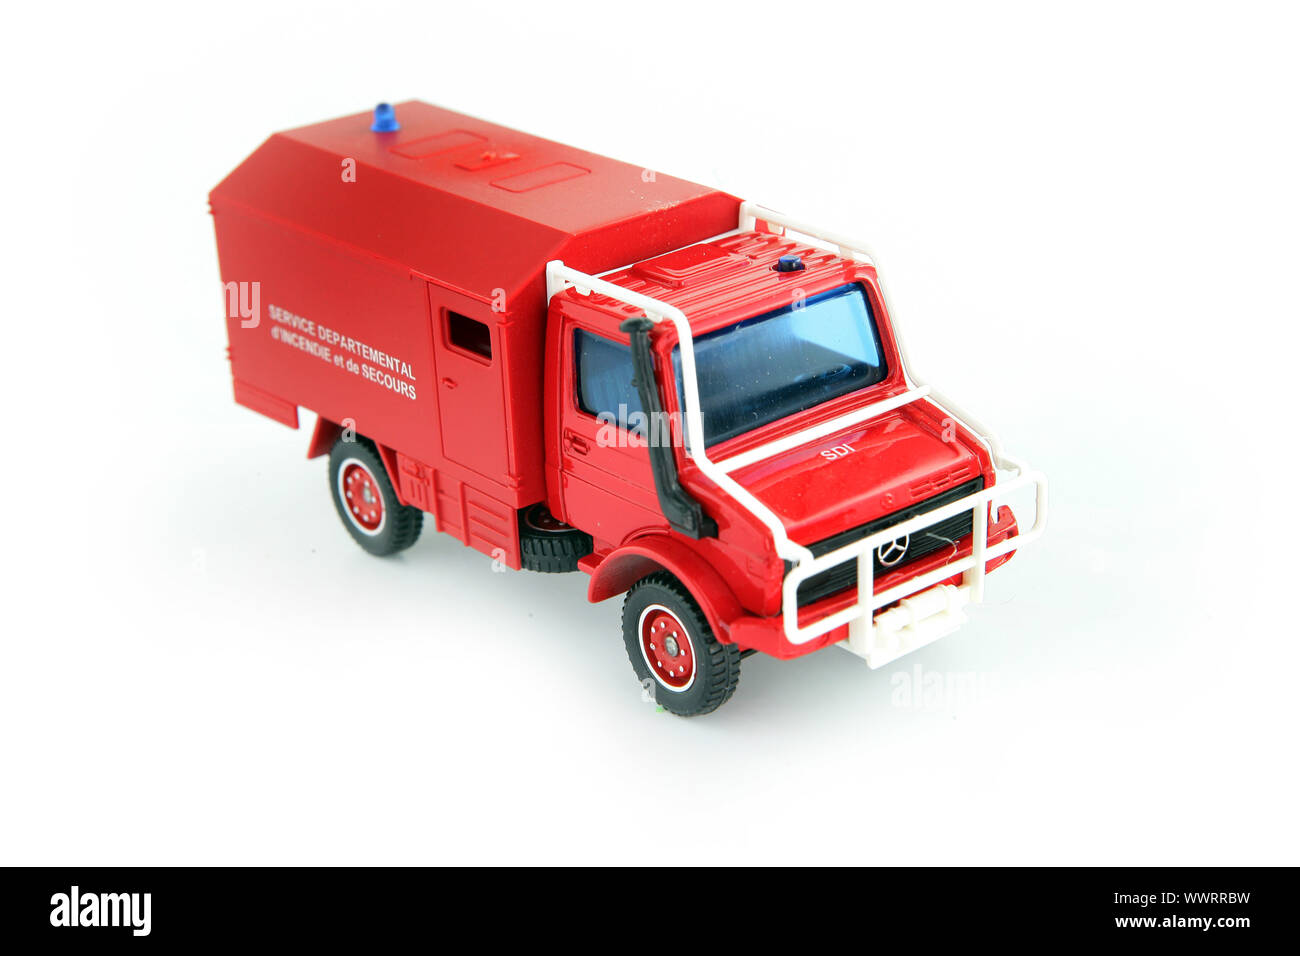 Toy fire engine Stock Photo